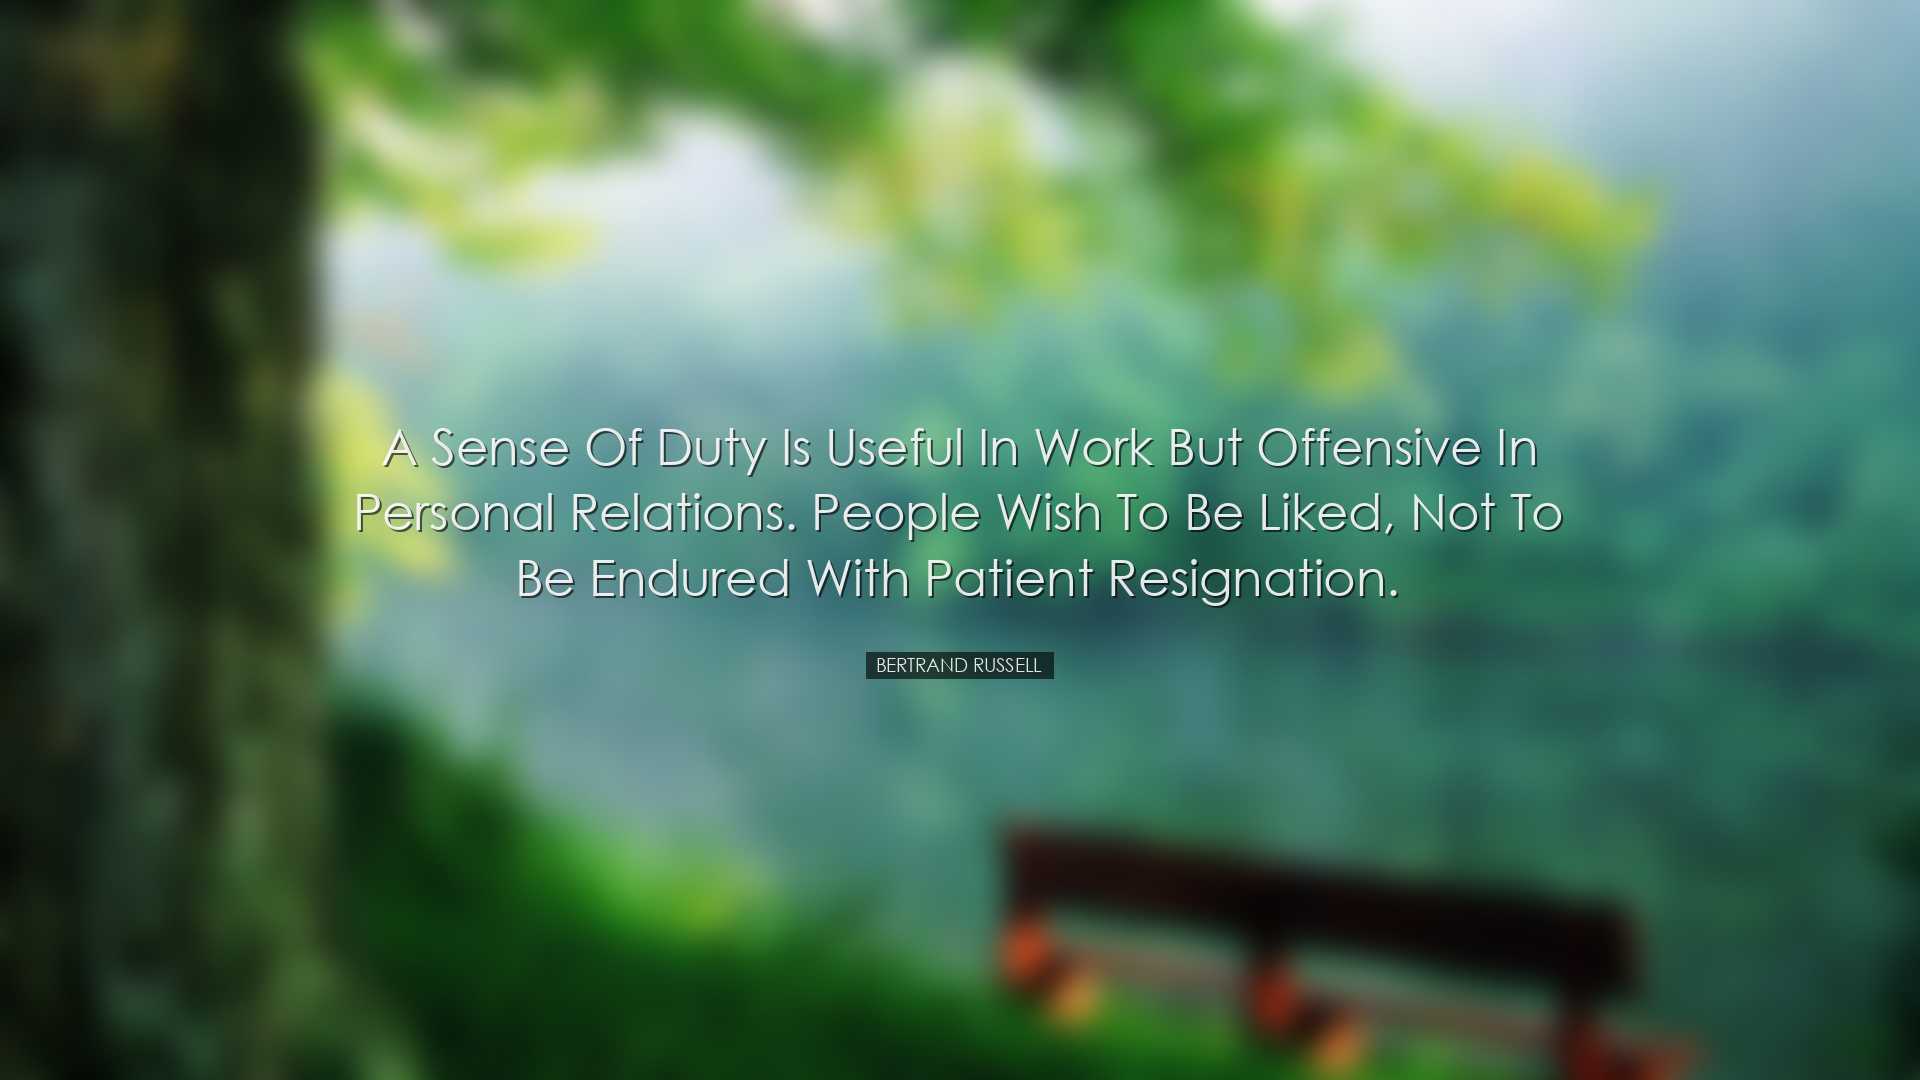 A sense of duty is useful in work but offensive in personal relati